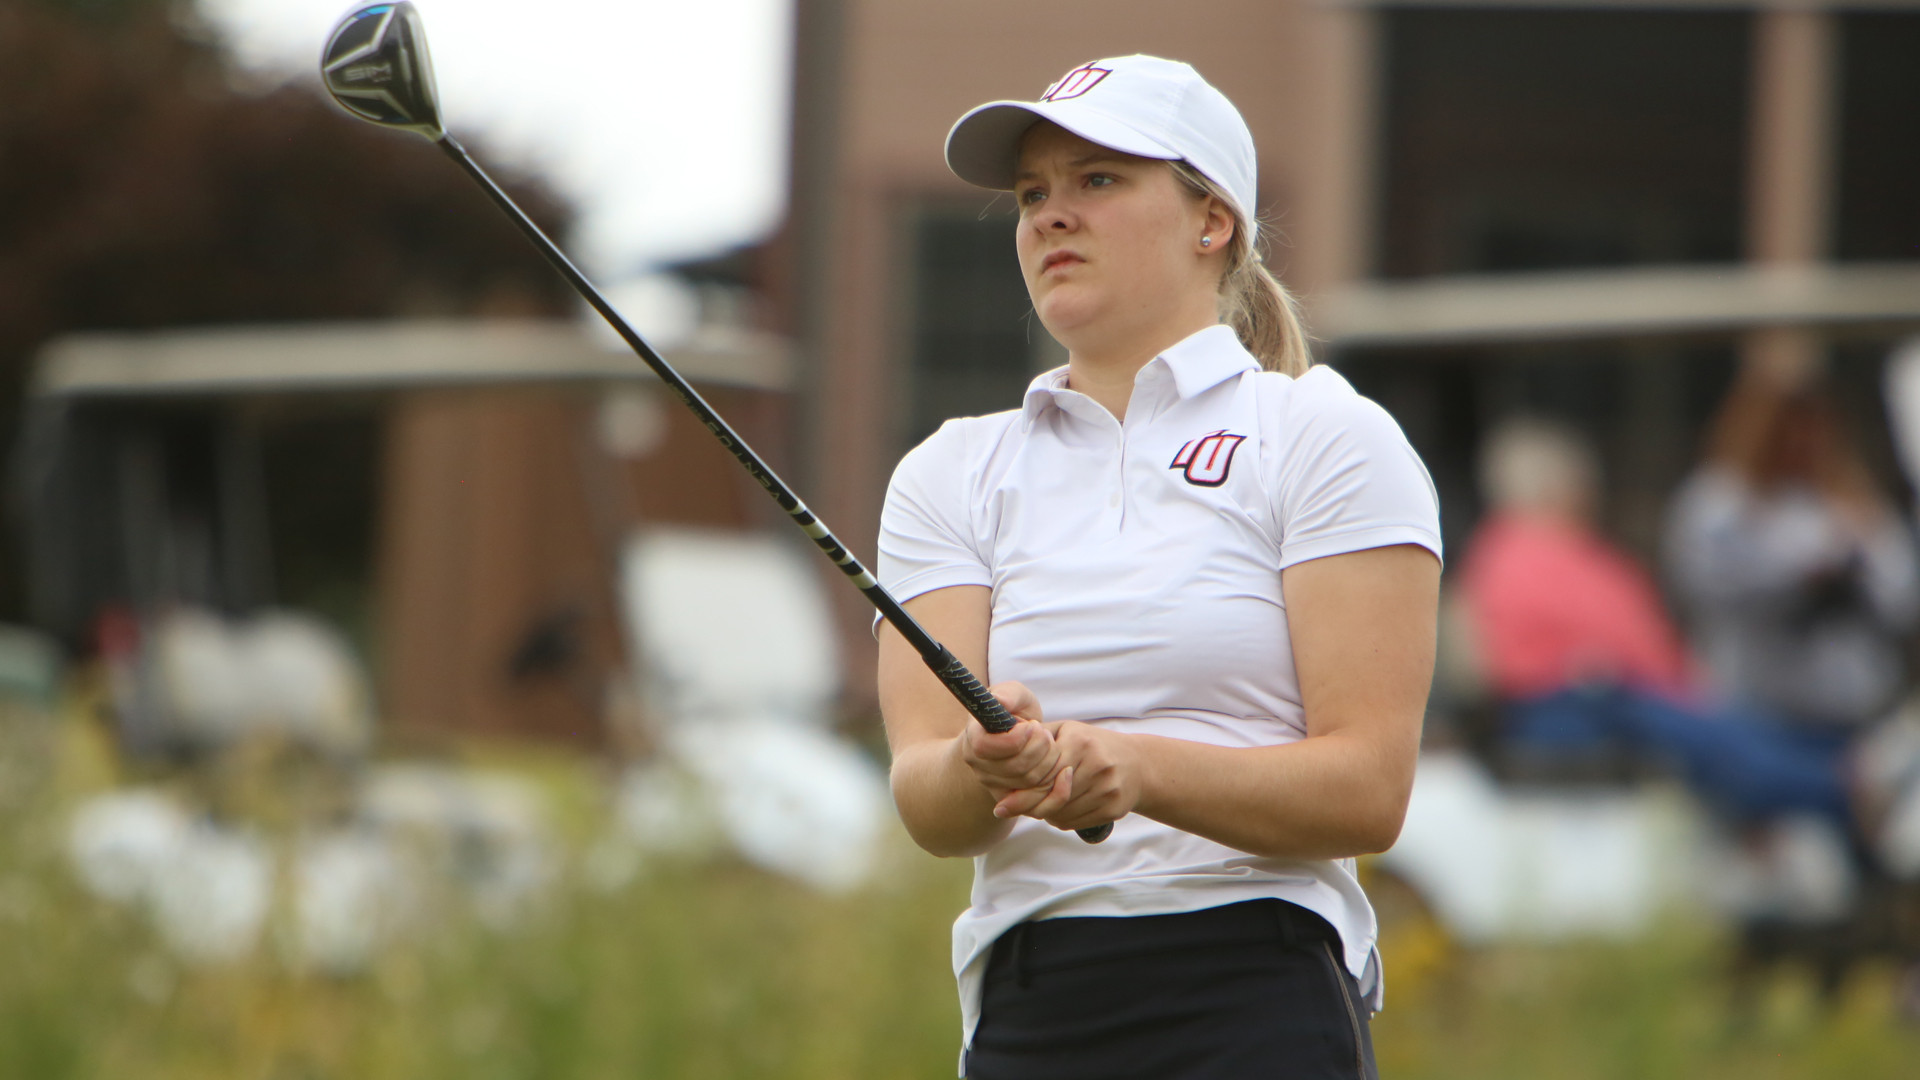 Anna Ahonen's tournament total 223 is tied for the 3rd lowest in TU history.